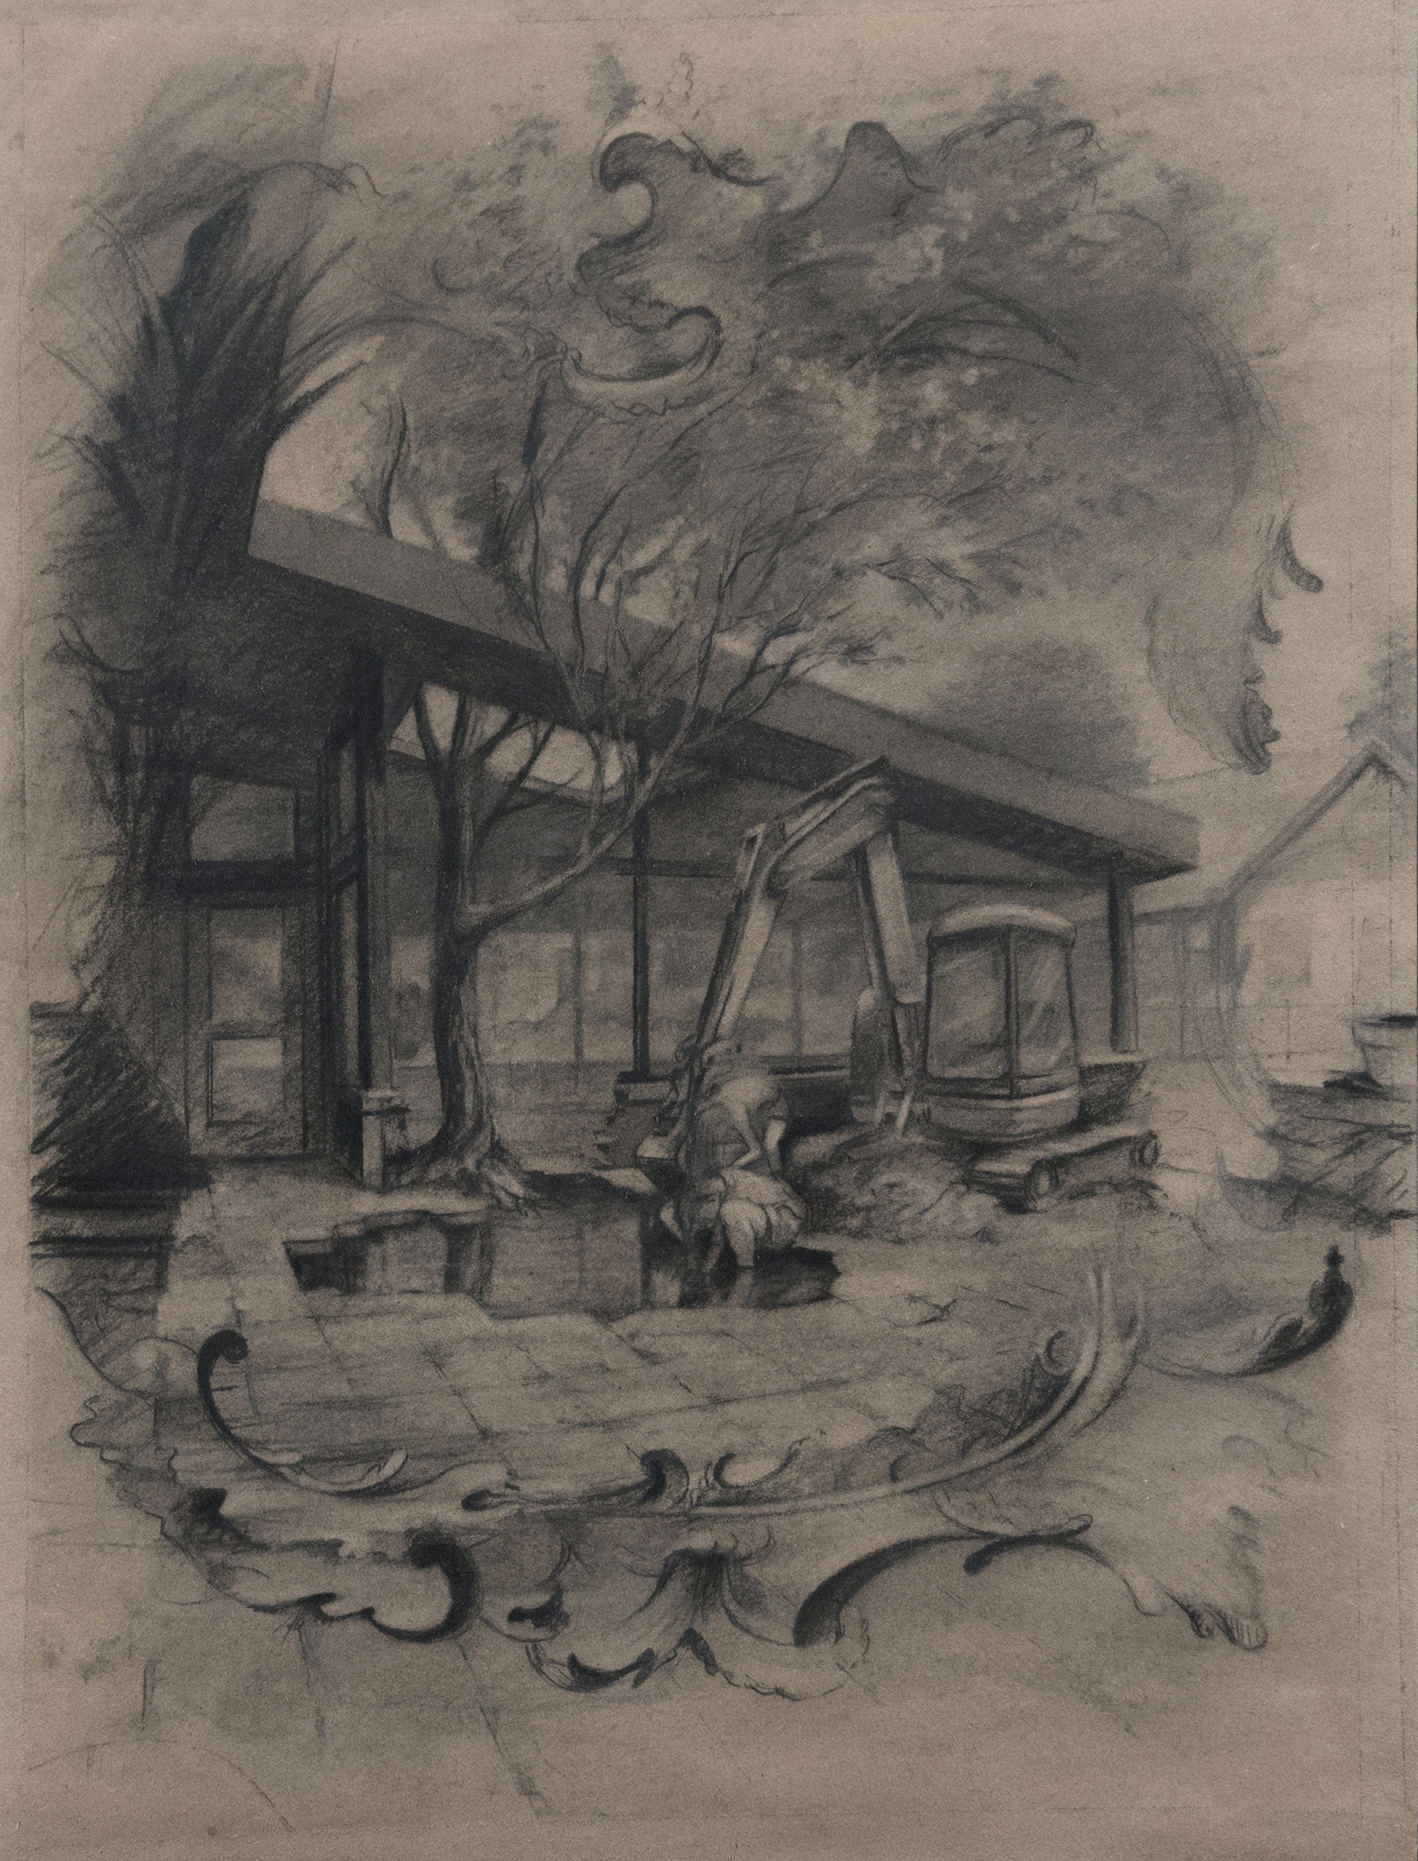   Wishing Well (KJM) , 2018  charcoal on brown paper  19 x 15 in.       